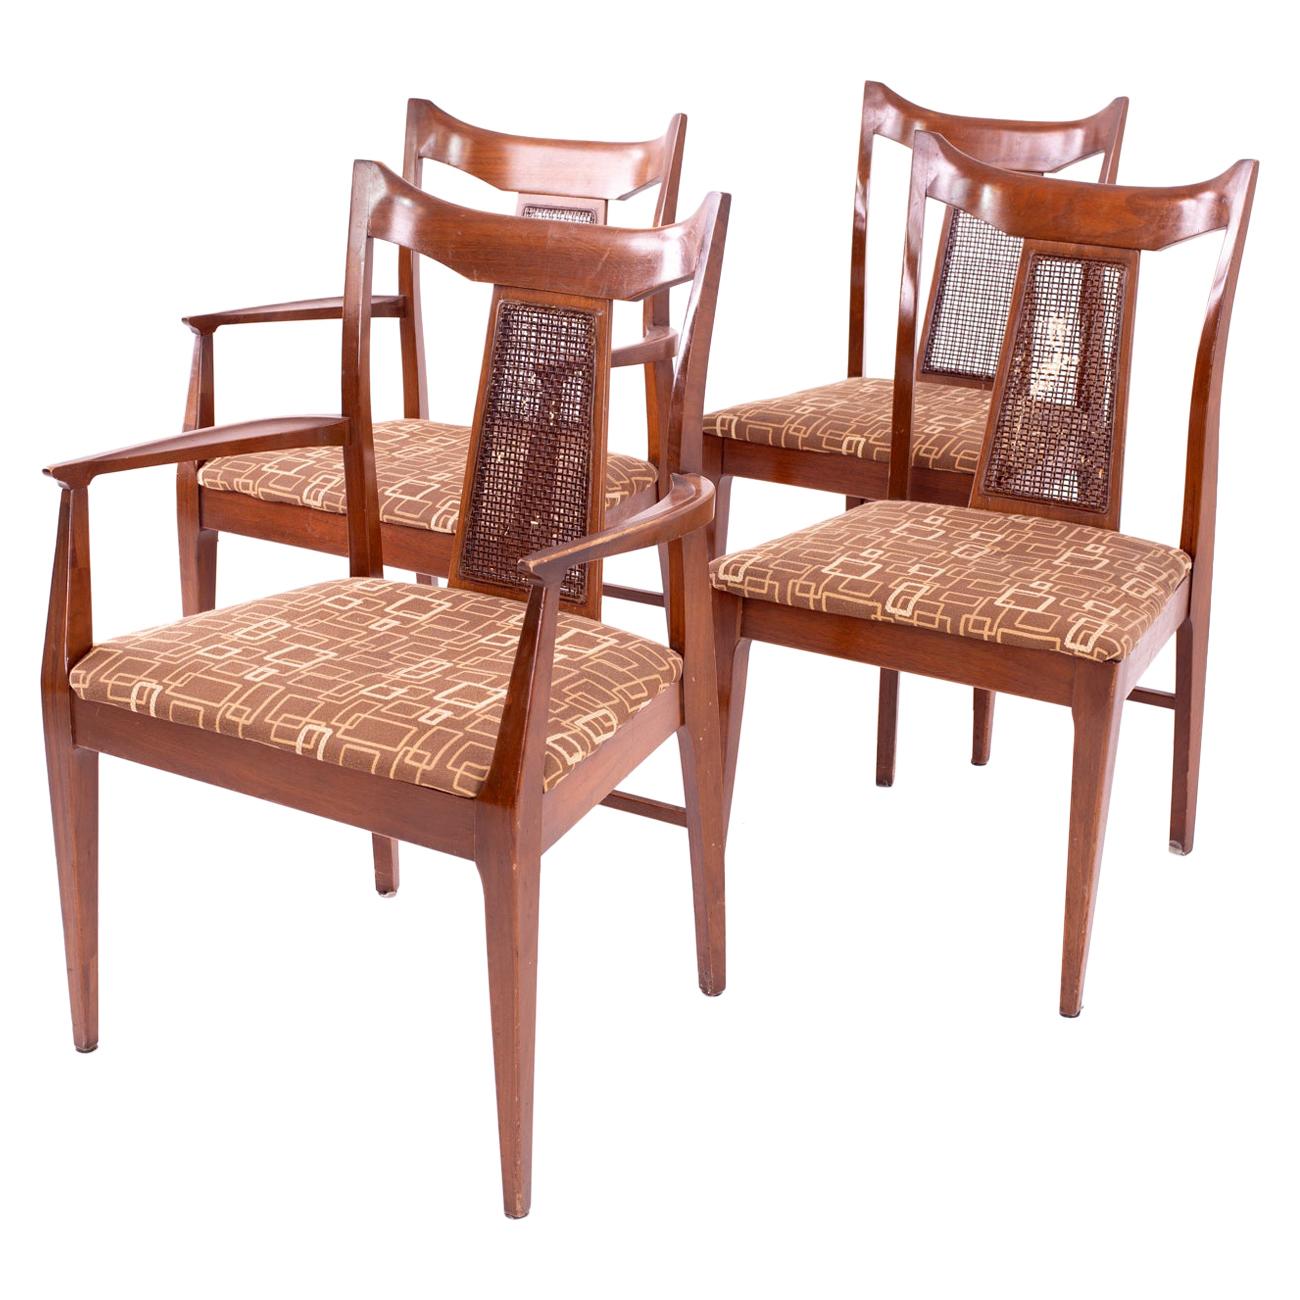 Jack Lenor Larsen style Mid Century walnut and cane upholstered dining chairs - set of 4
Each chair measures: 23.25 wide x 20.25 deep x 35.75 high with a seat height of 18.25 inches
This price includes getting this set in what we call restored